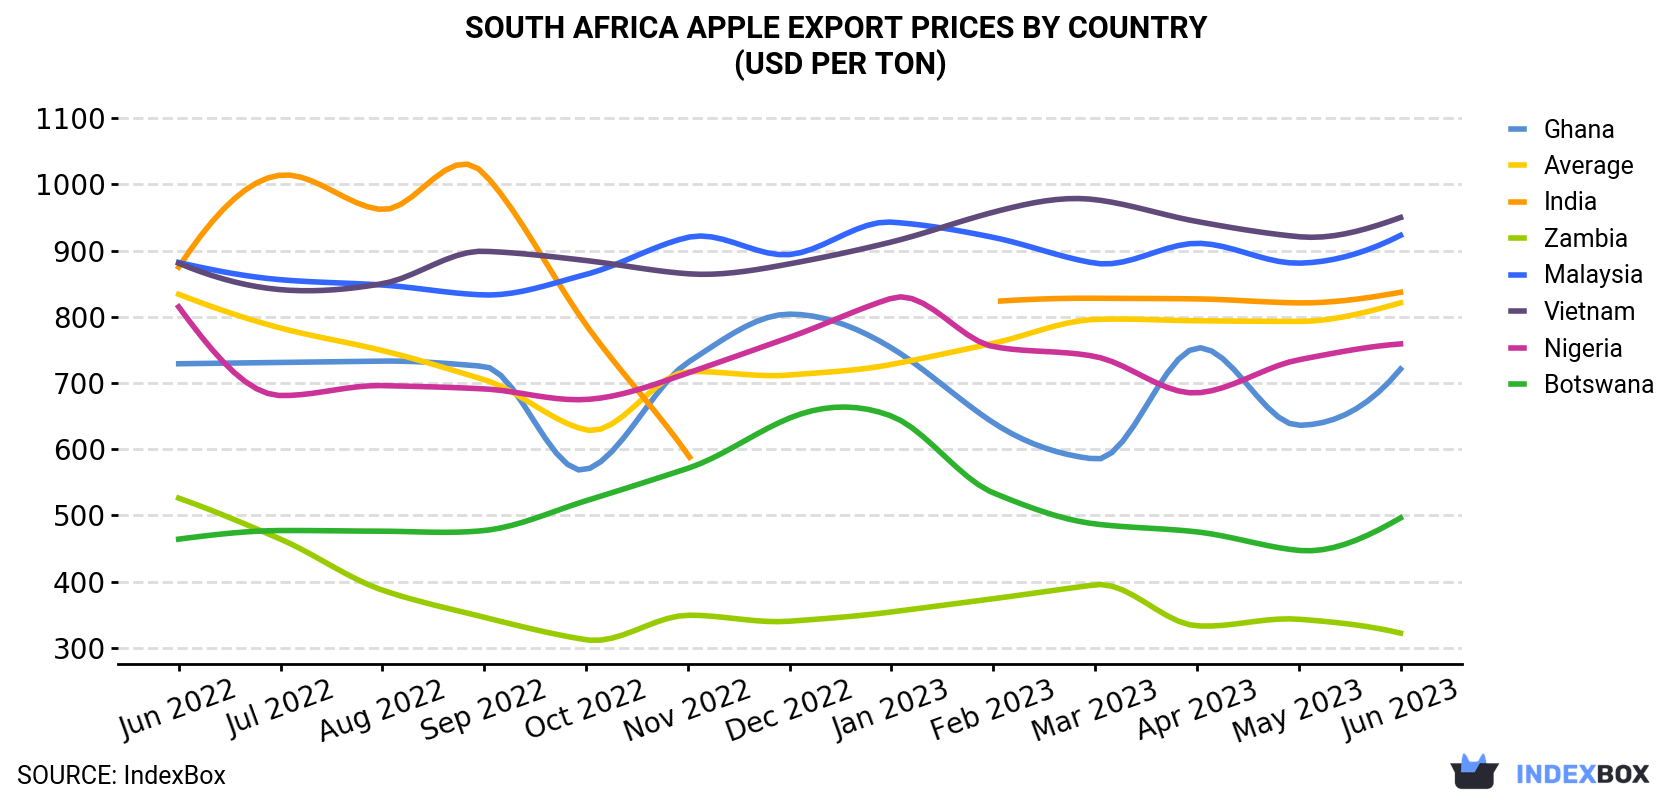 South Africa Apple Export Prices By Country (USD Per Ton)